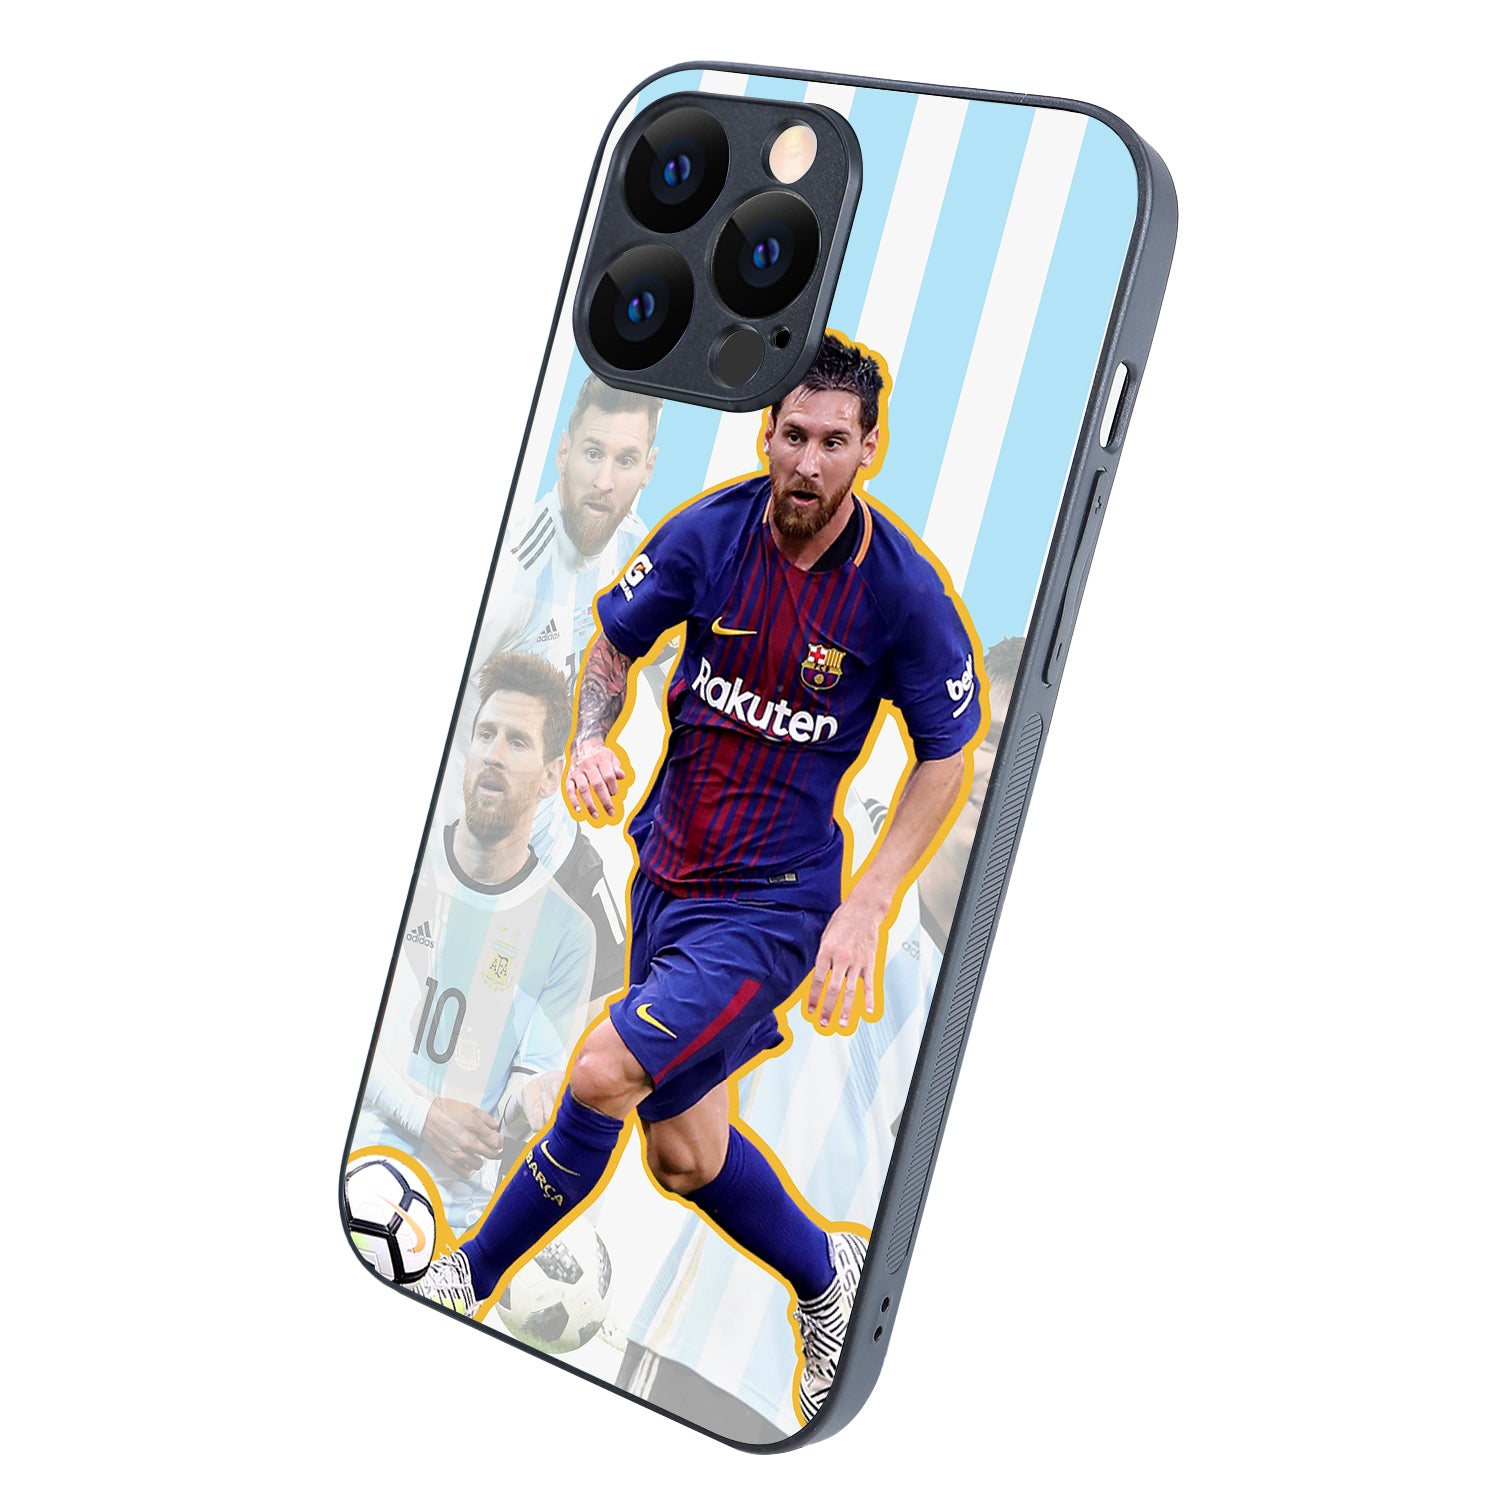 Messi Collage Sports iPhone 13 Pro Max Case